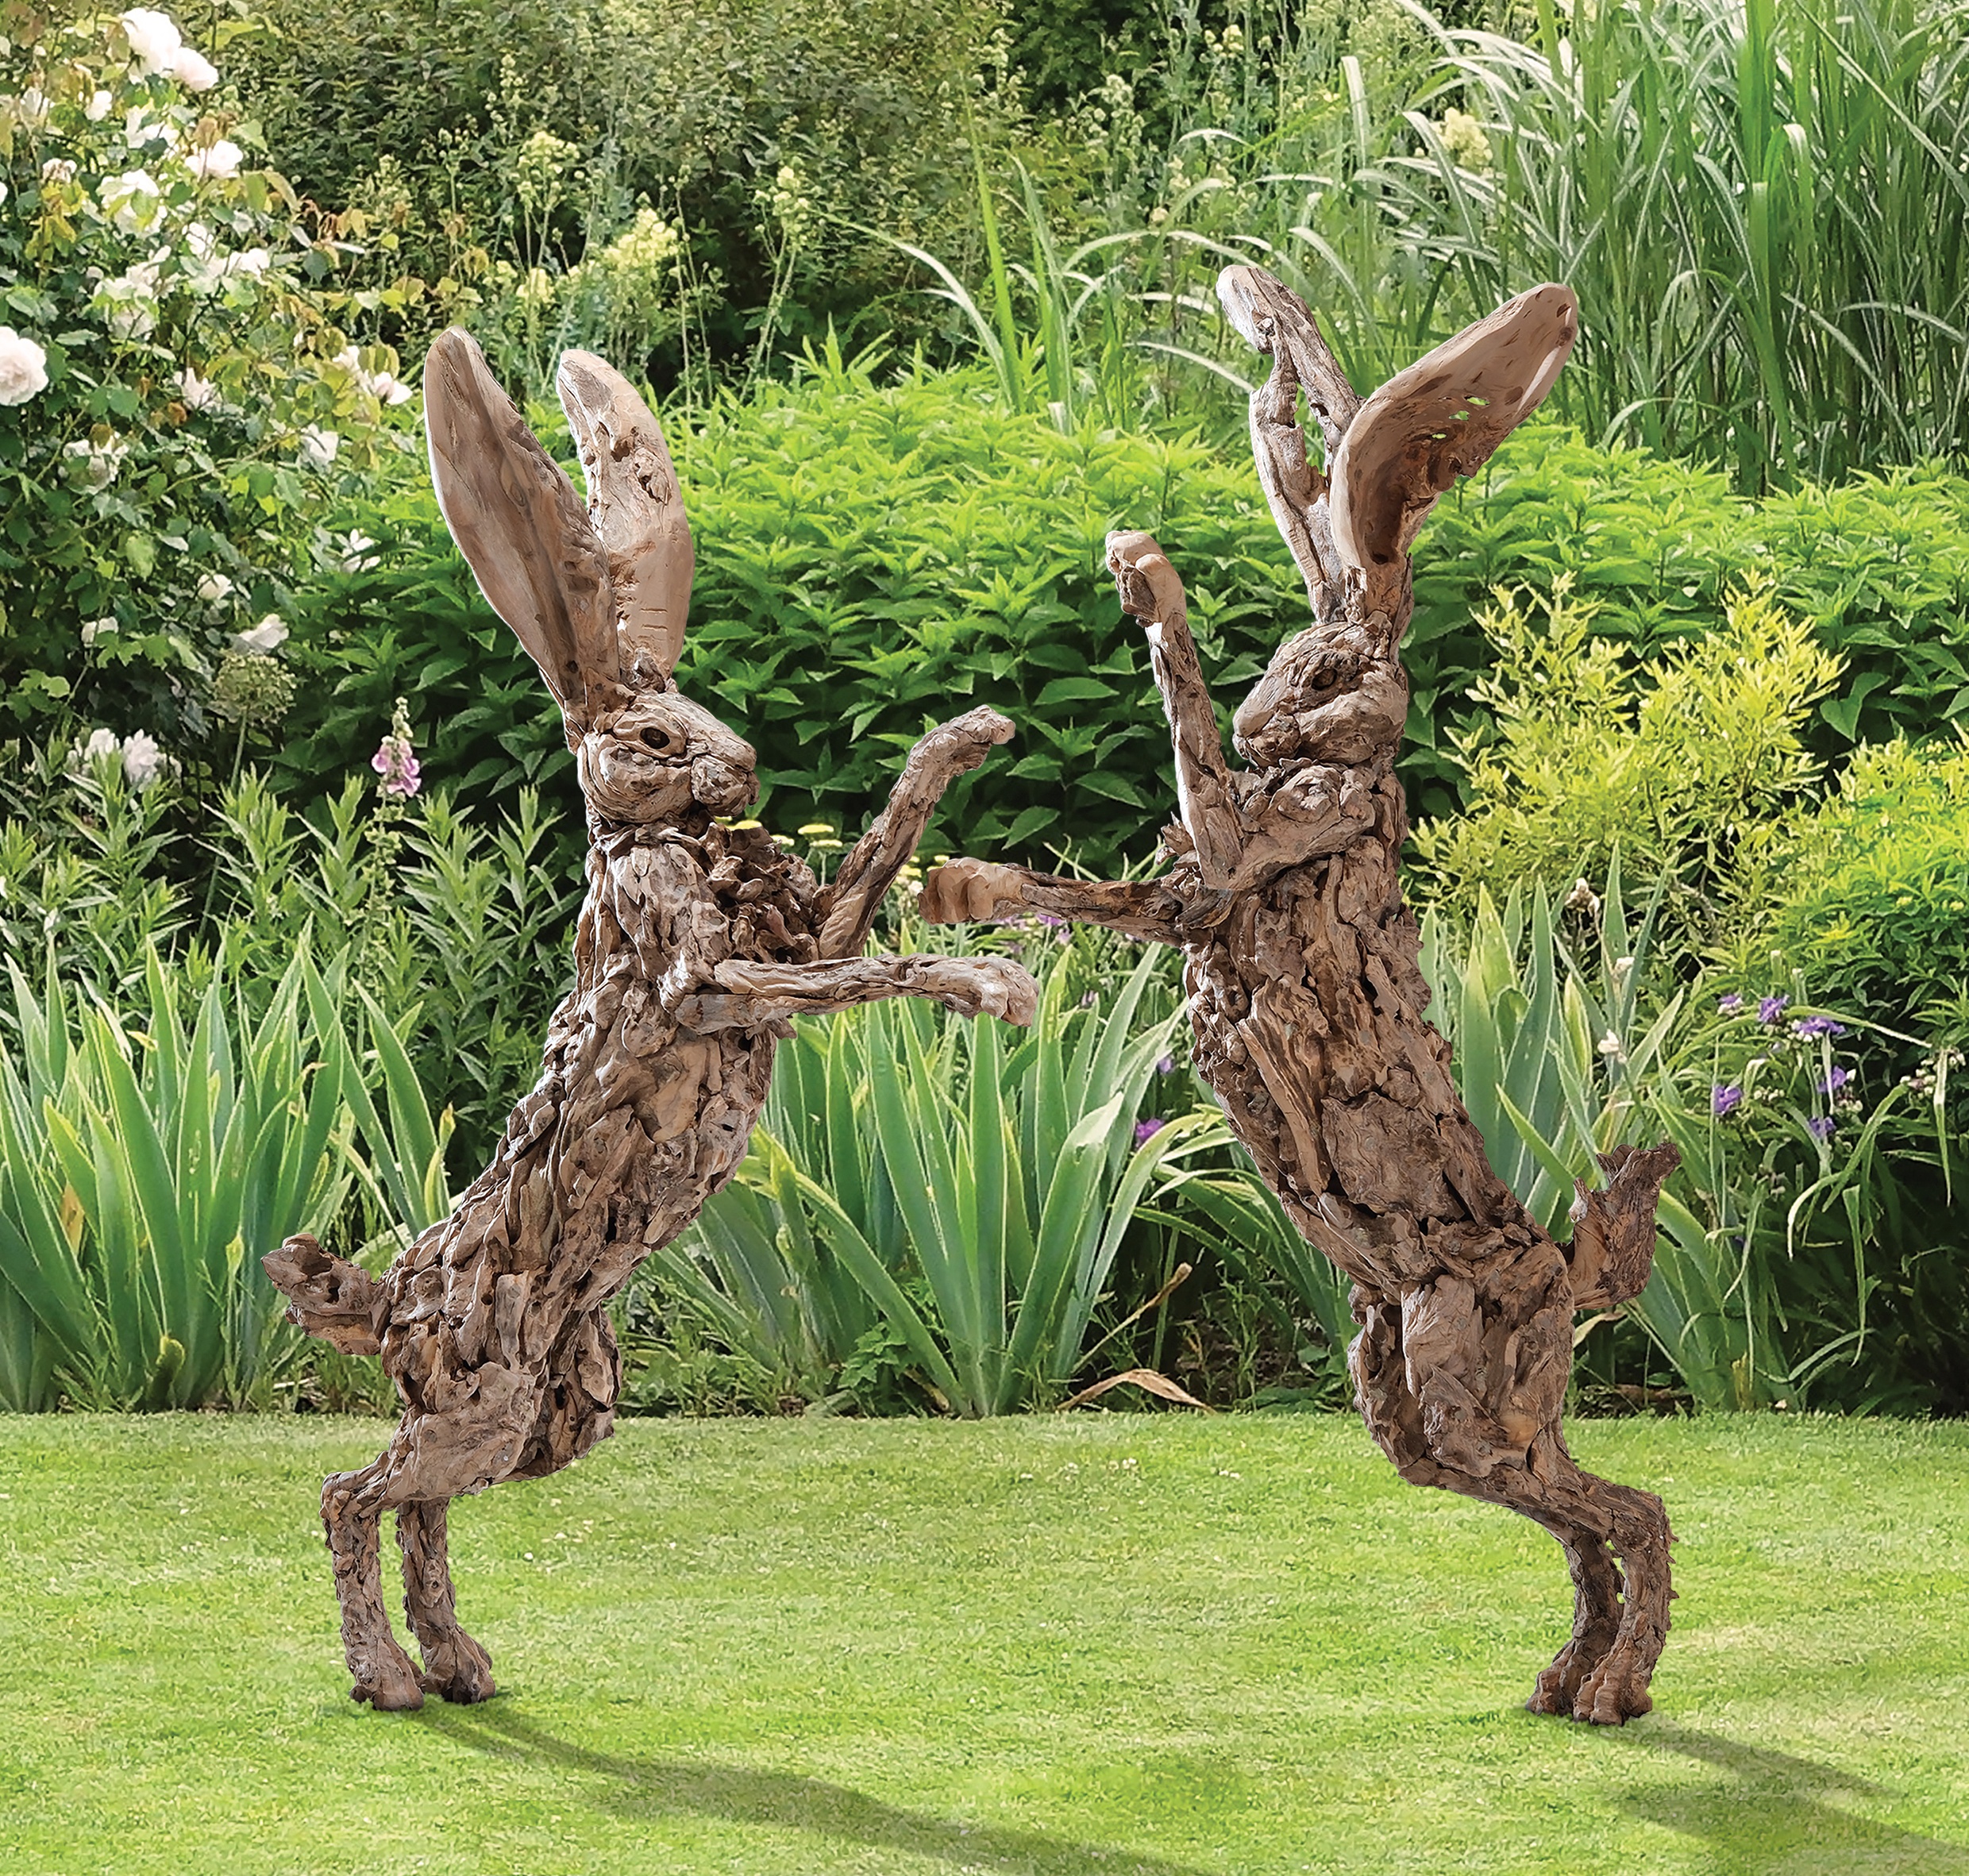 The Spring Hares